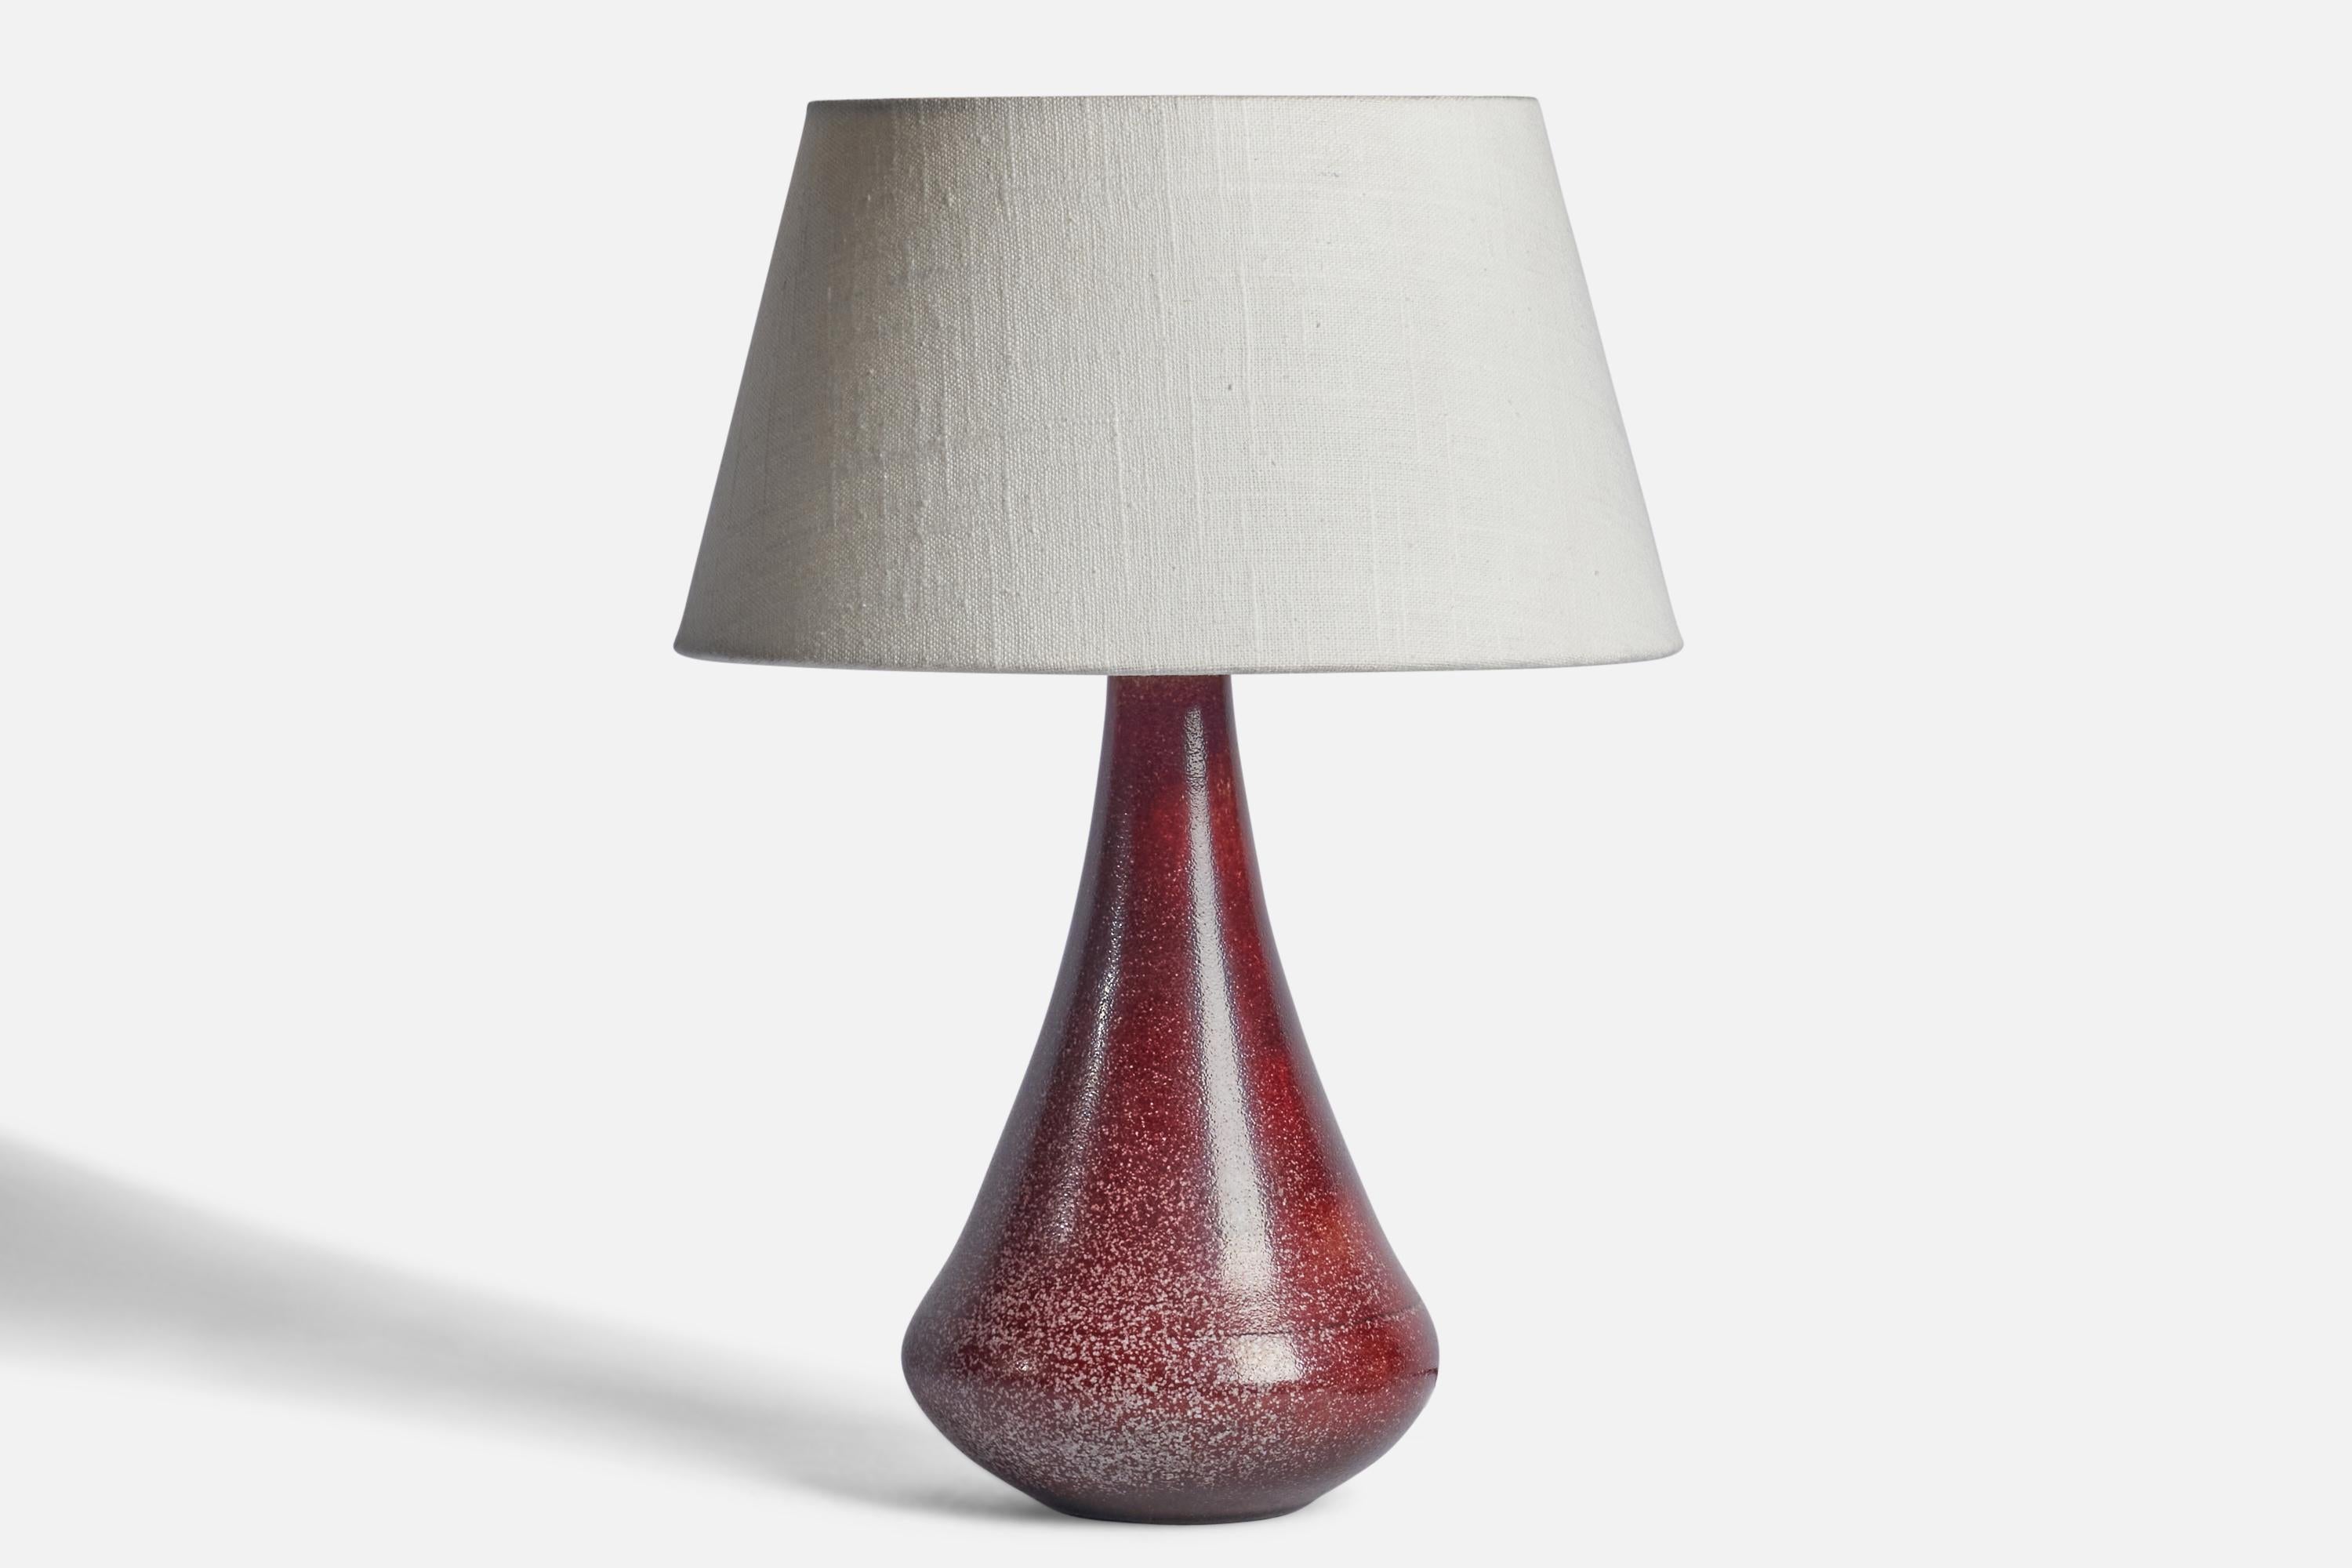 A red-glazed ceramic table lamp designed and produced in Denmark, 1940s.

Dimensions of Lamp (inches): 11